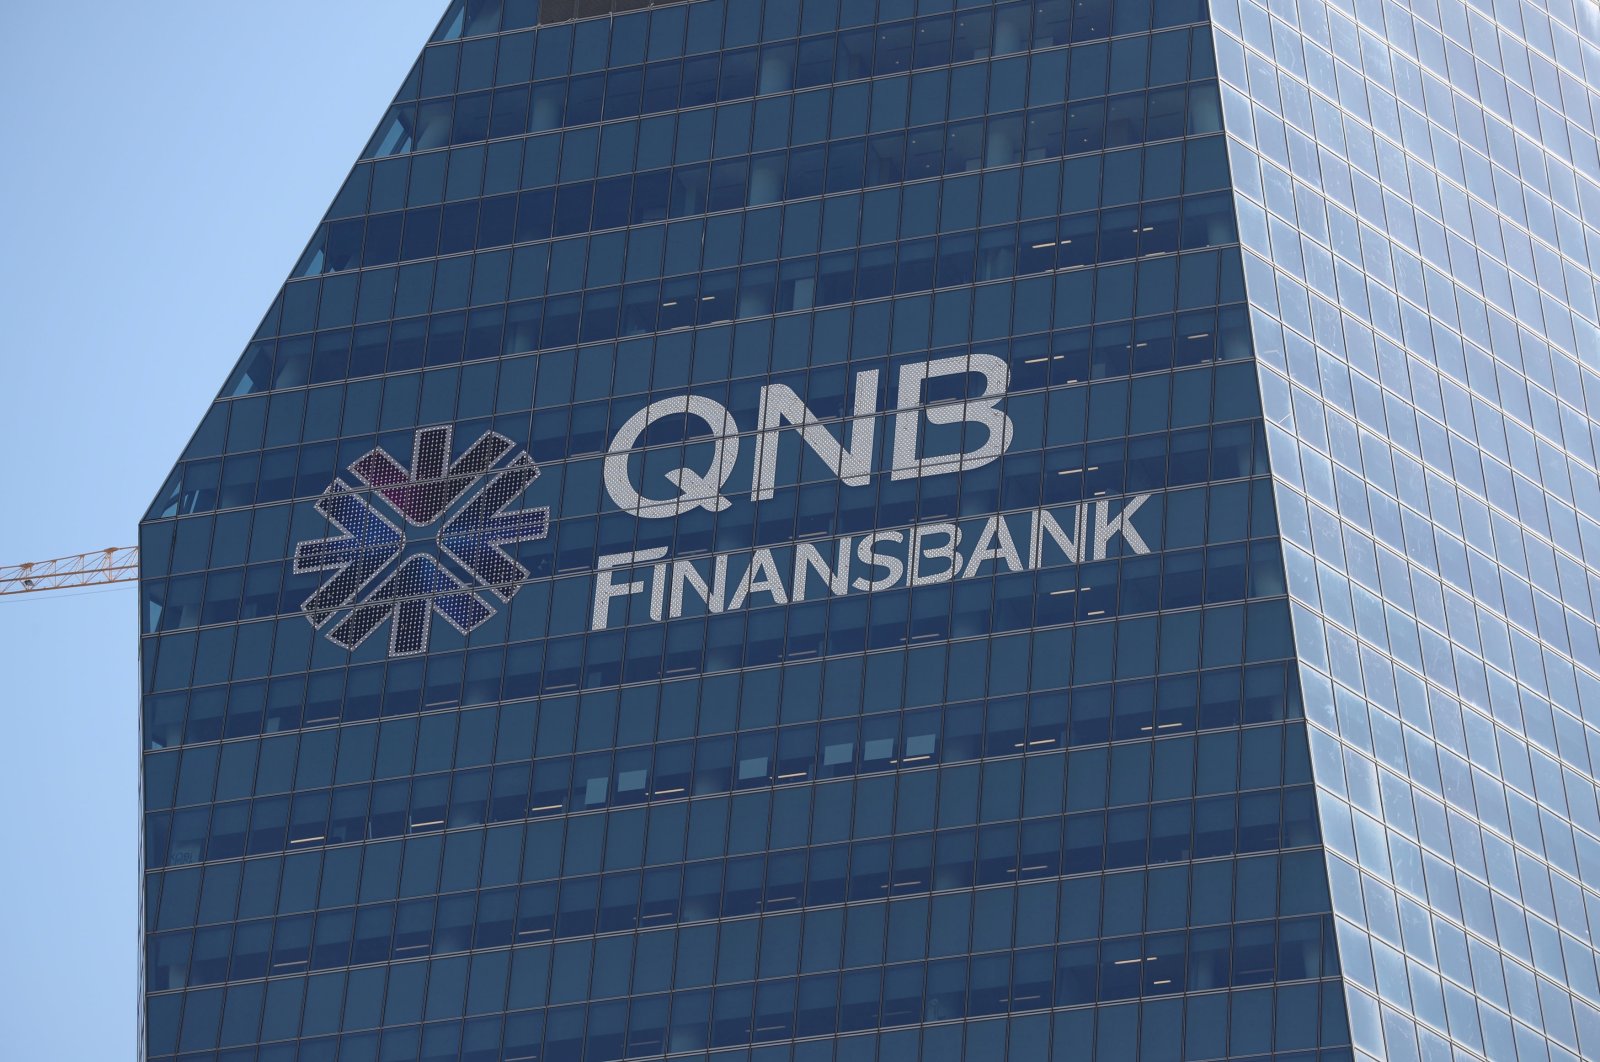 QNB Finansbank headquarters are seen at the business and financial district of Levent in Istanbul, Turkey, Sept. 7, 2017. (Reuters Photo)